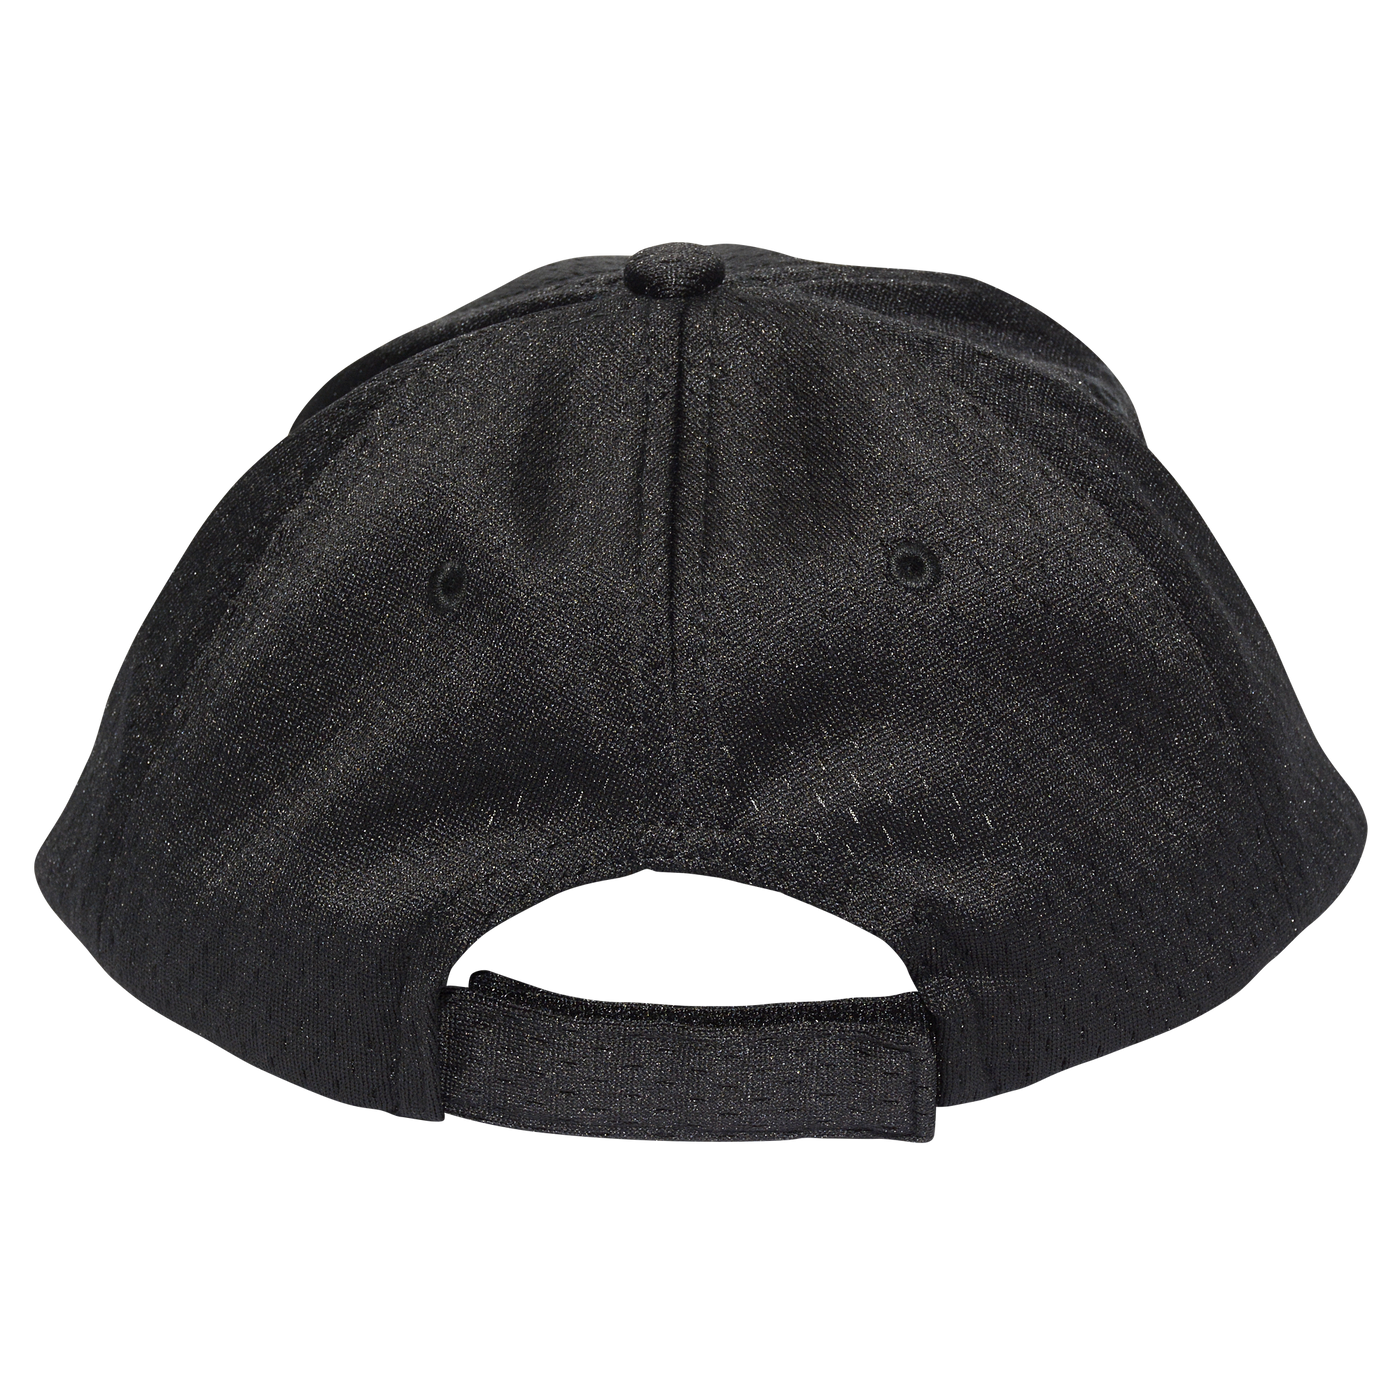 BW-Leather Patch (Center-Brand) Curved Bill Adjustable Hat-YOUTH